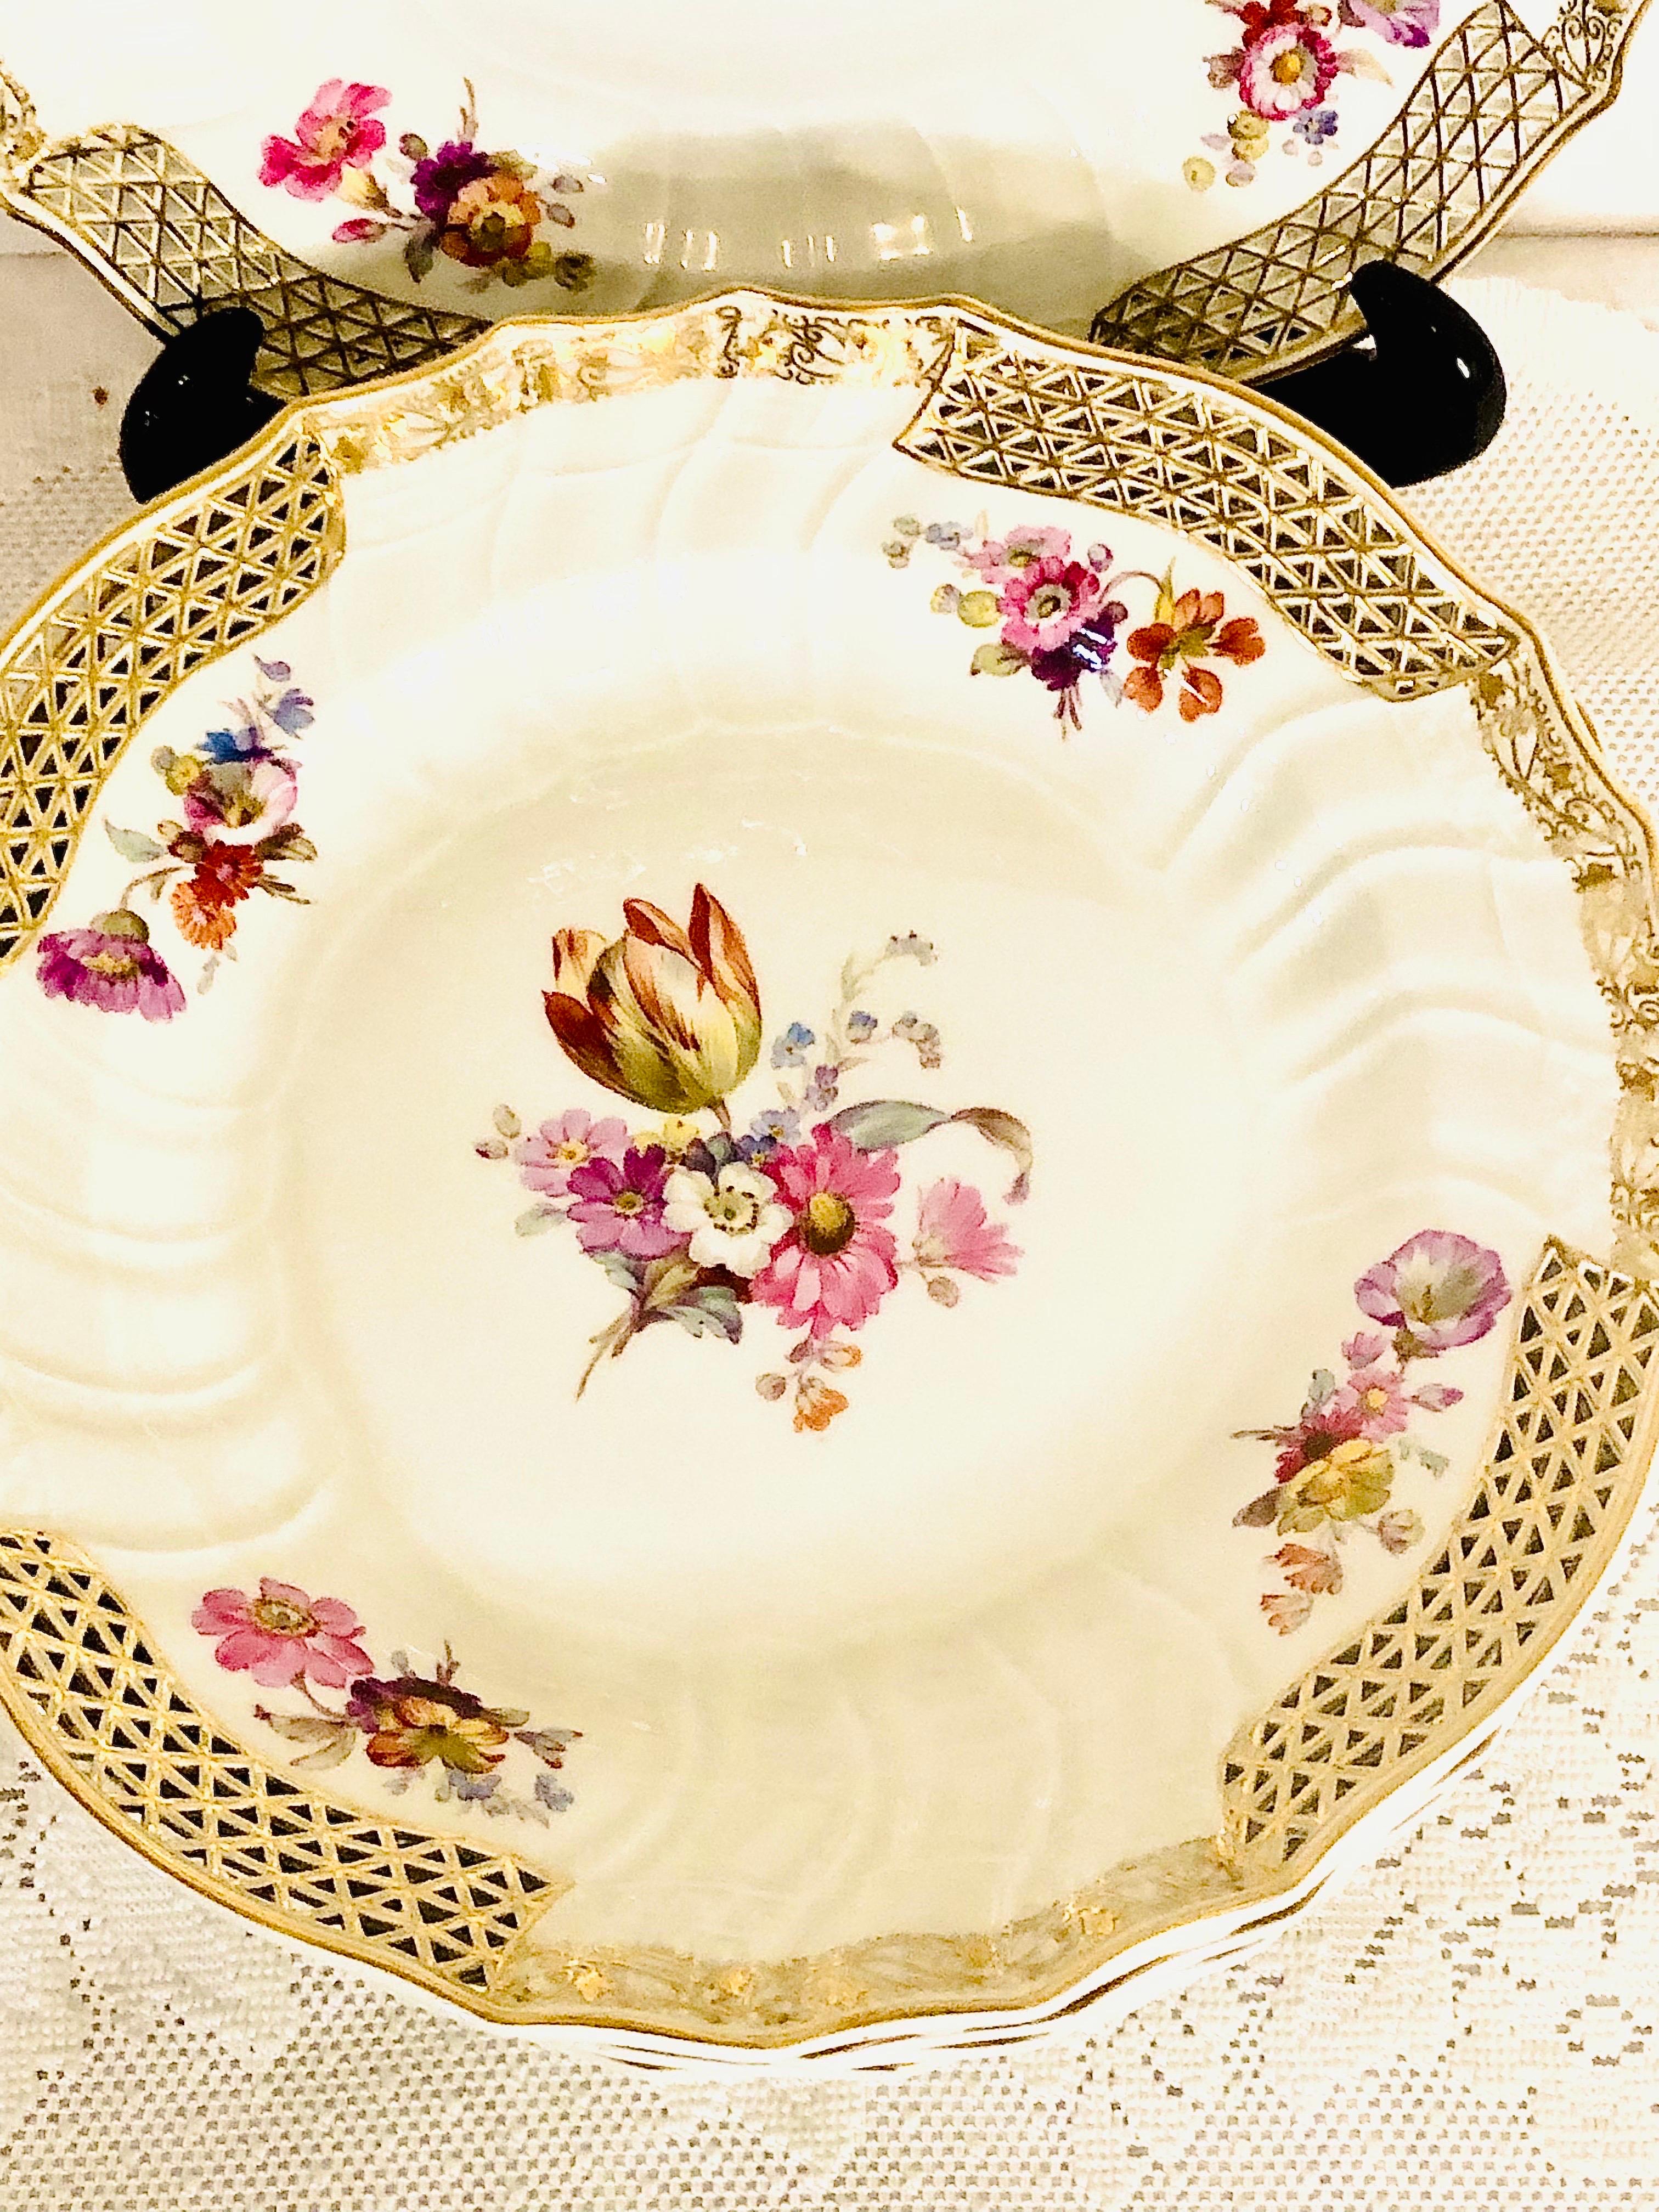 Set of eight rare KPM dinner plates with different museum quality hand-painted floral bouquets on each plate. KPM is also known as the Konigliche Porzellan-Manufaktur of Germany. They had very talented artists who did an outstanding job of painting